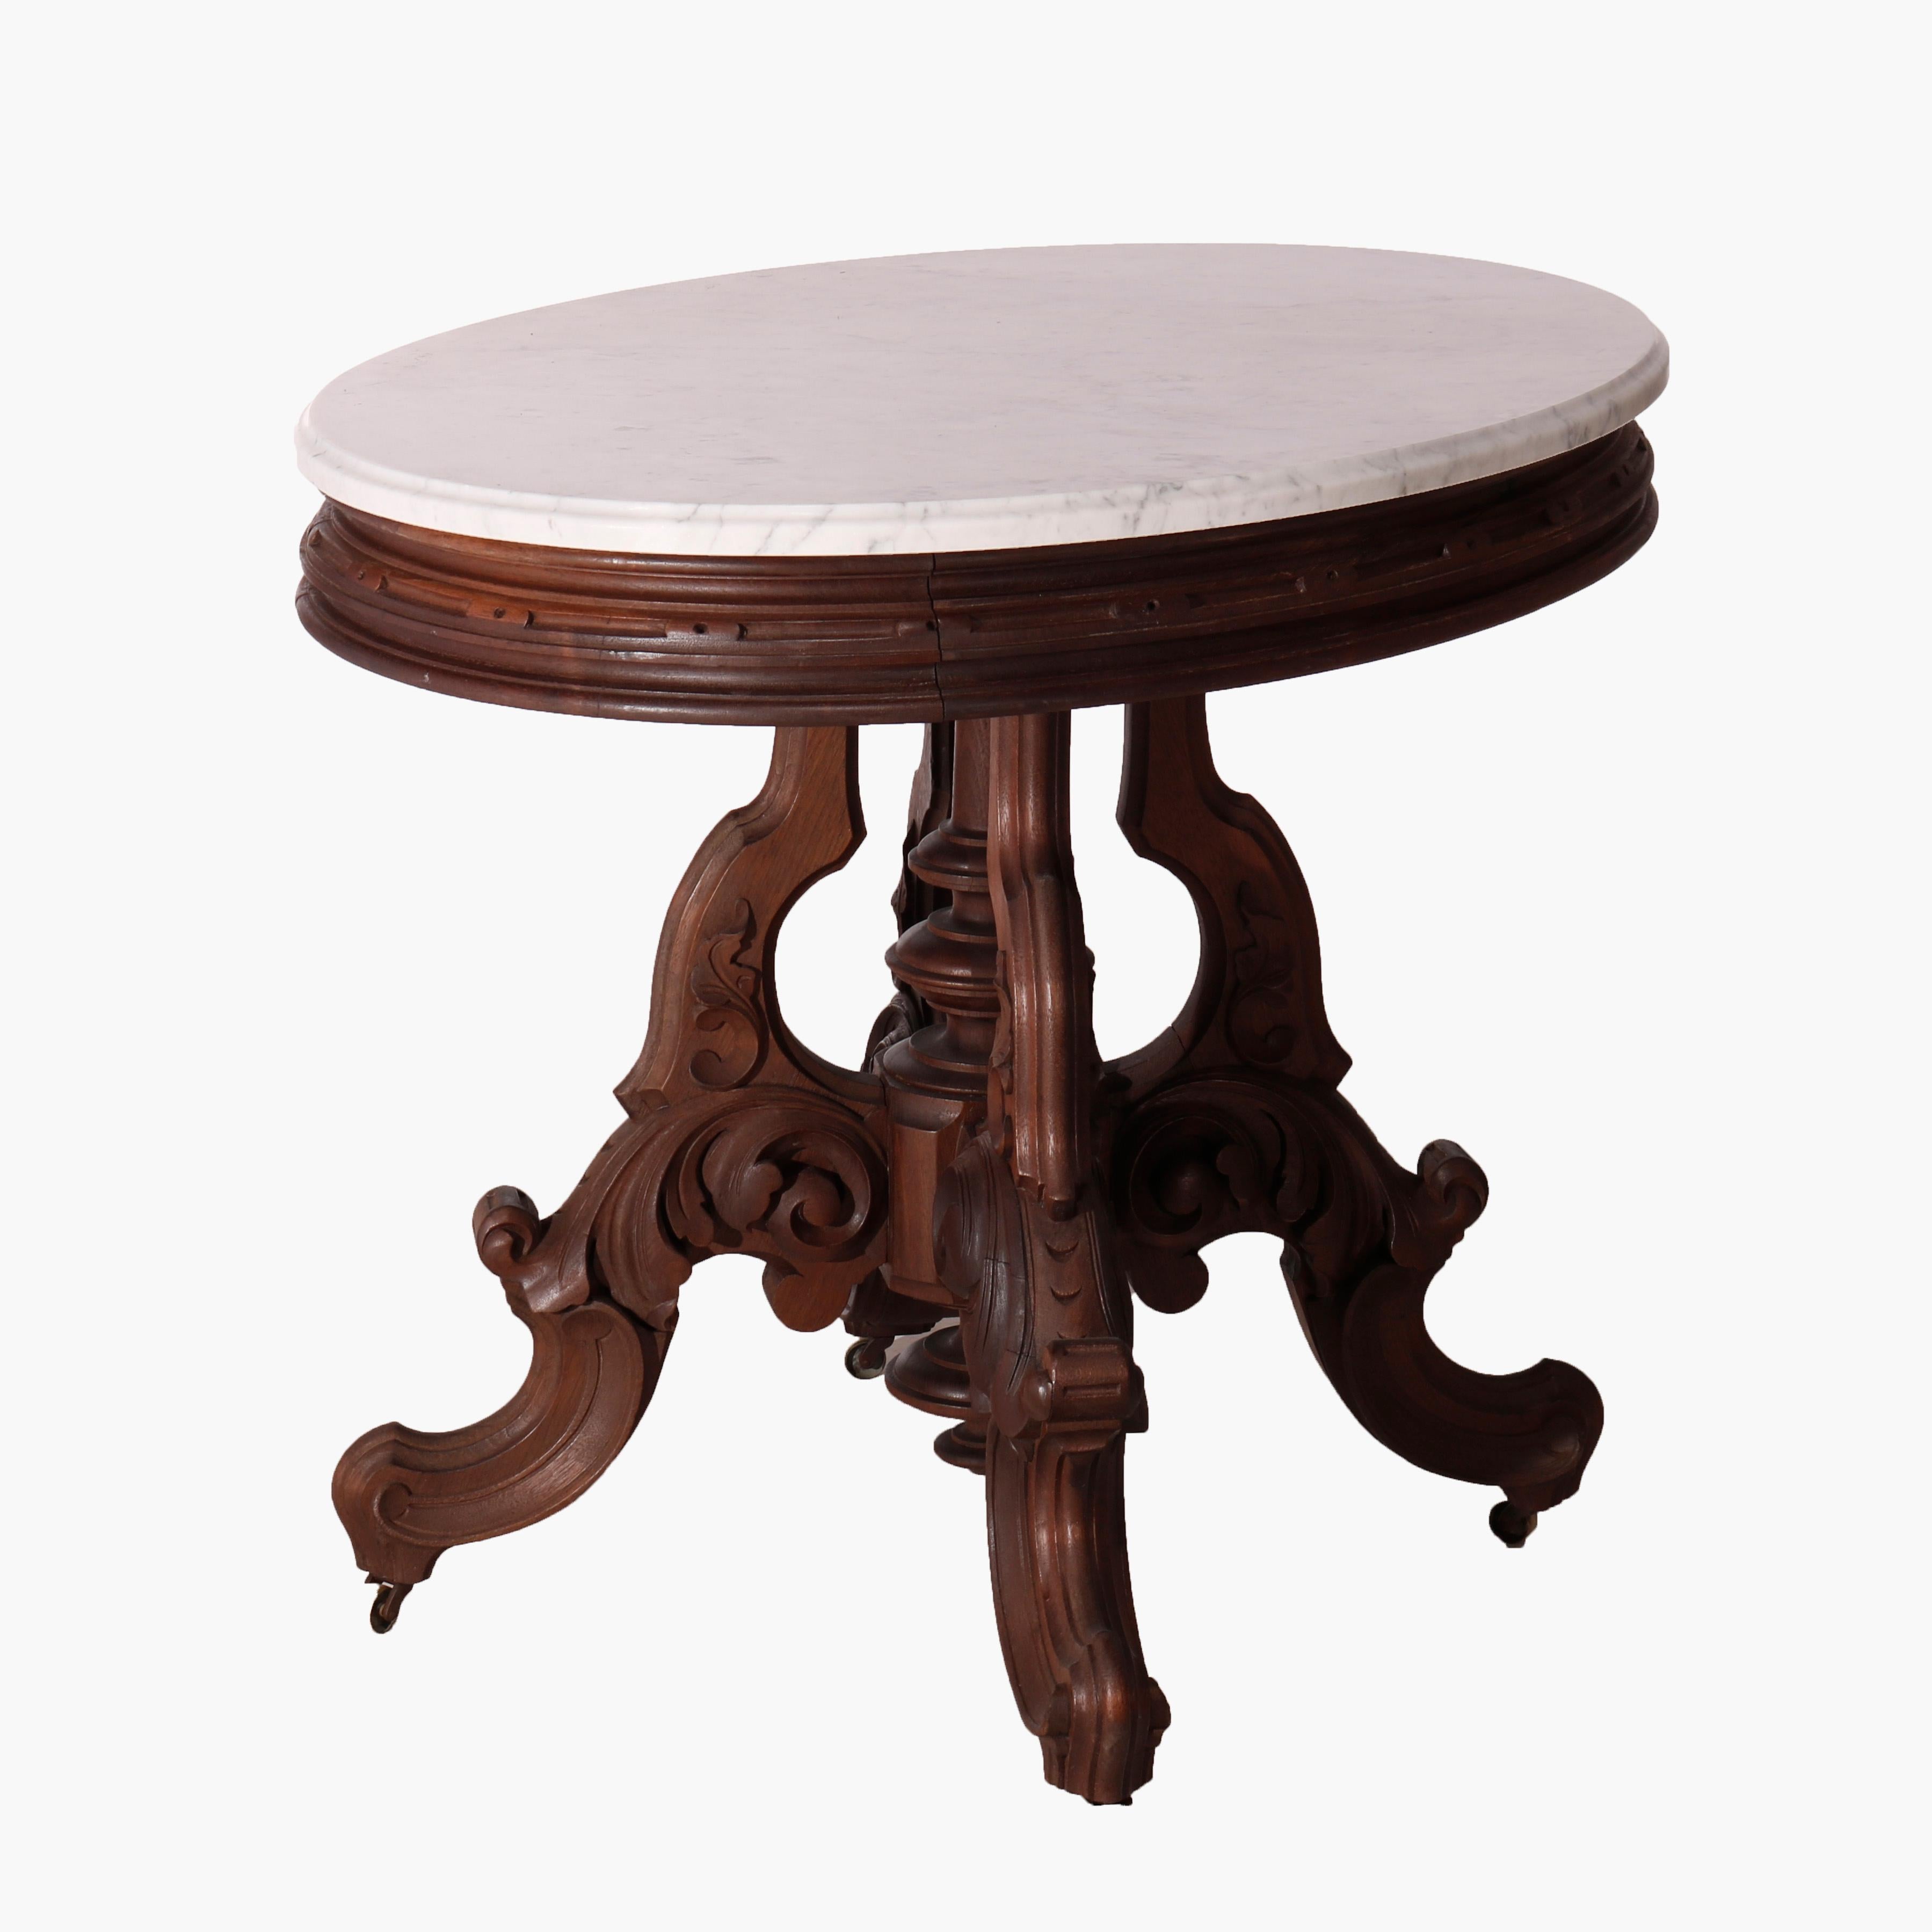 Oversized Antique Victorian Walnut Brooks Oval Marble Top Parlor Table 1890 For Sale 1